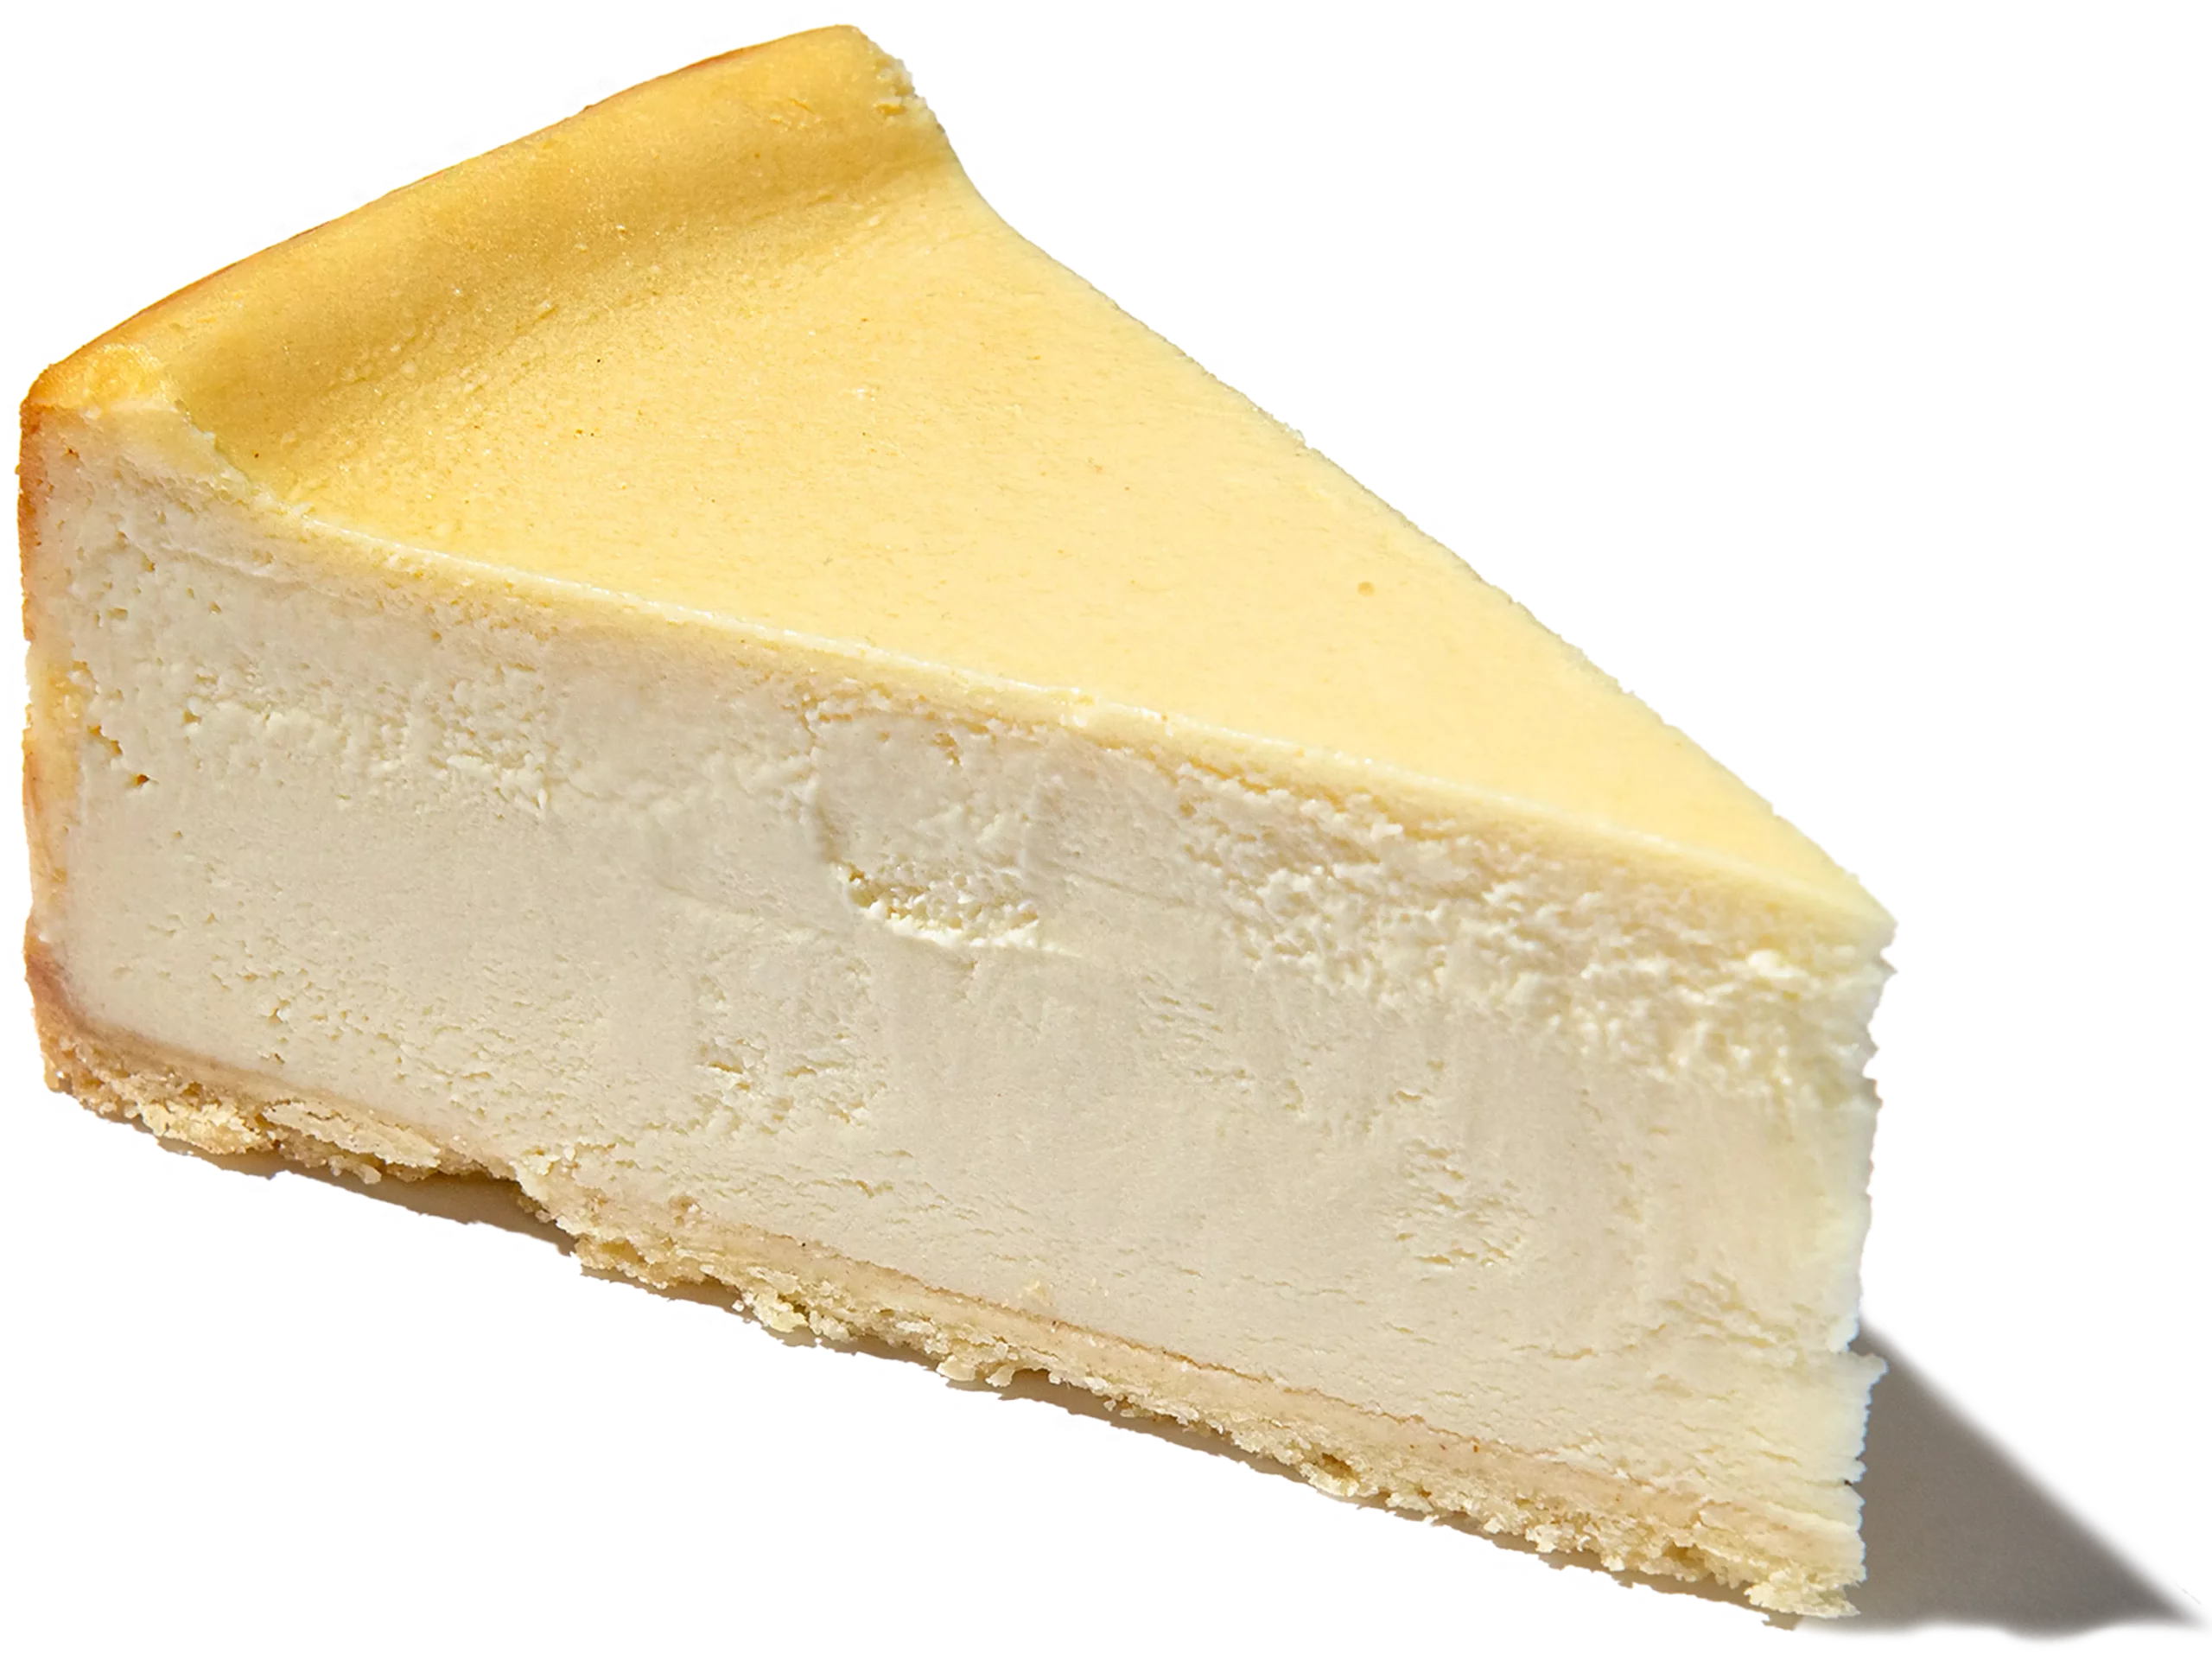 Slice of delicious looking cheesecake